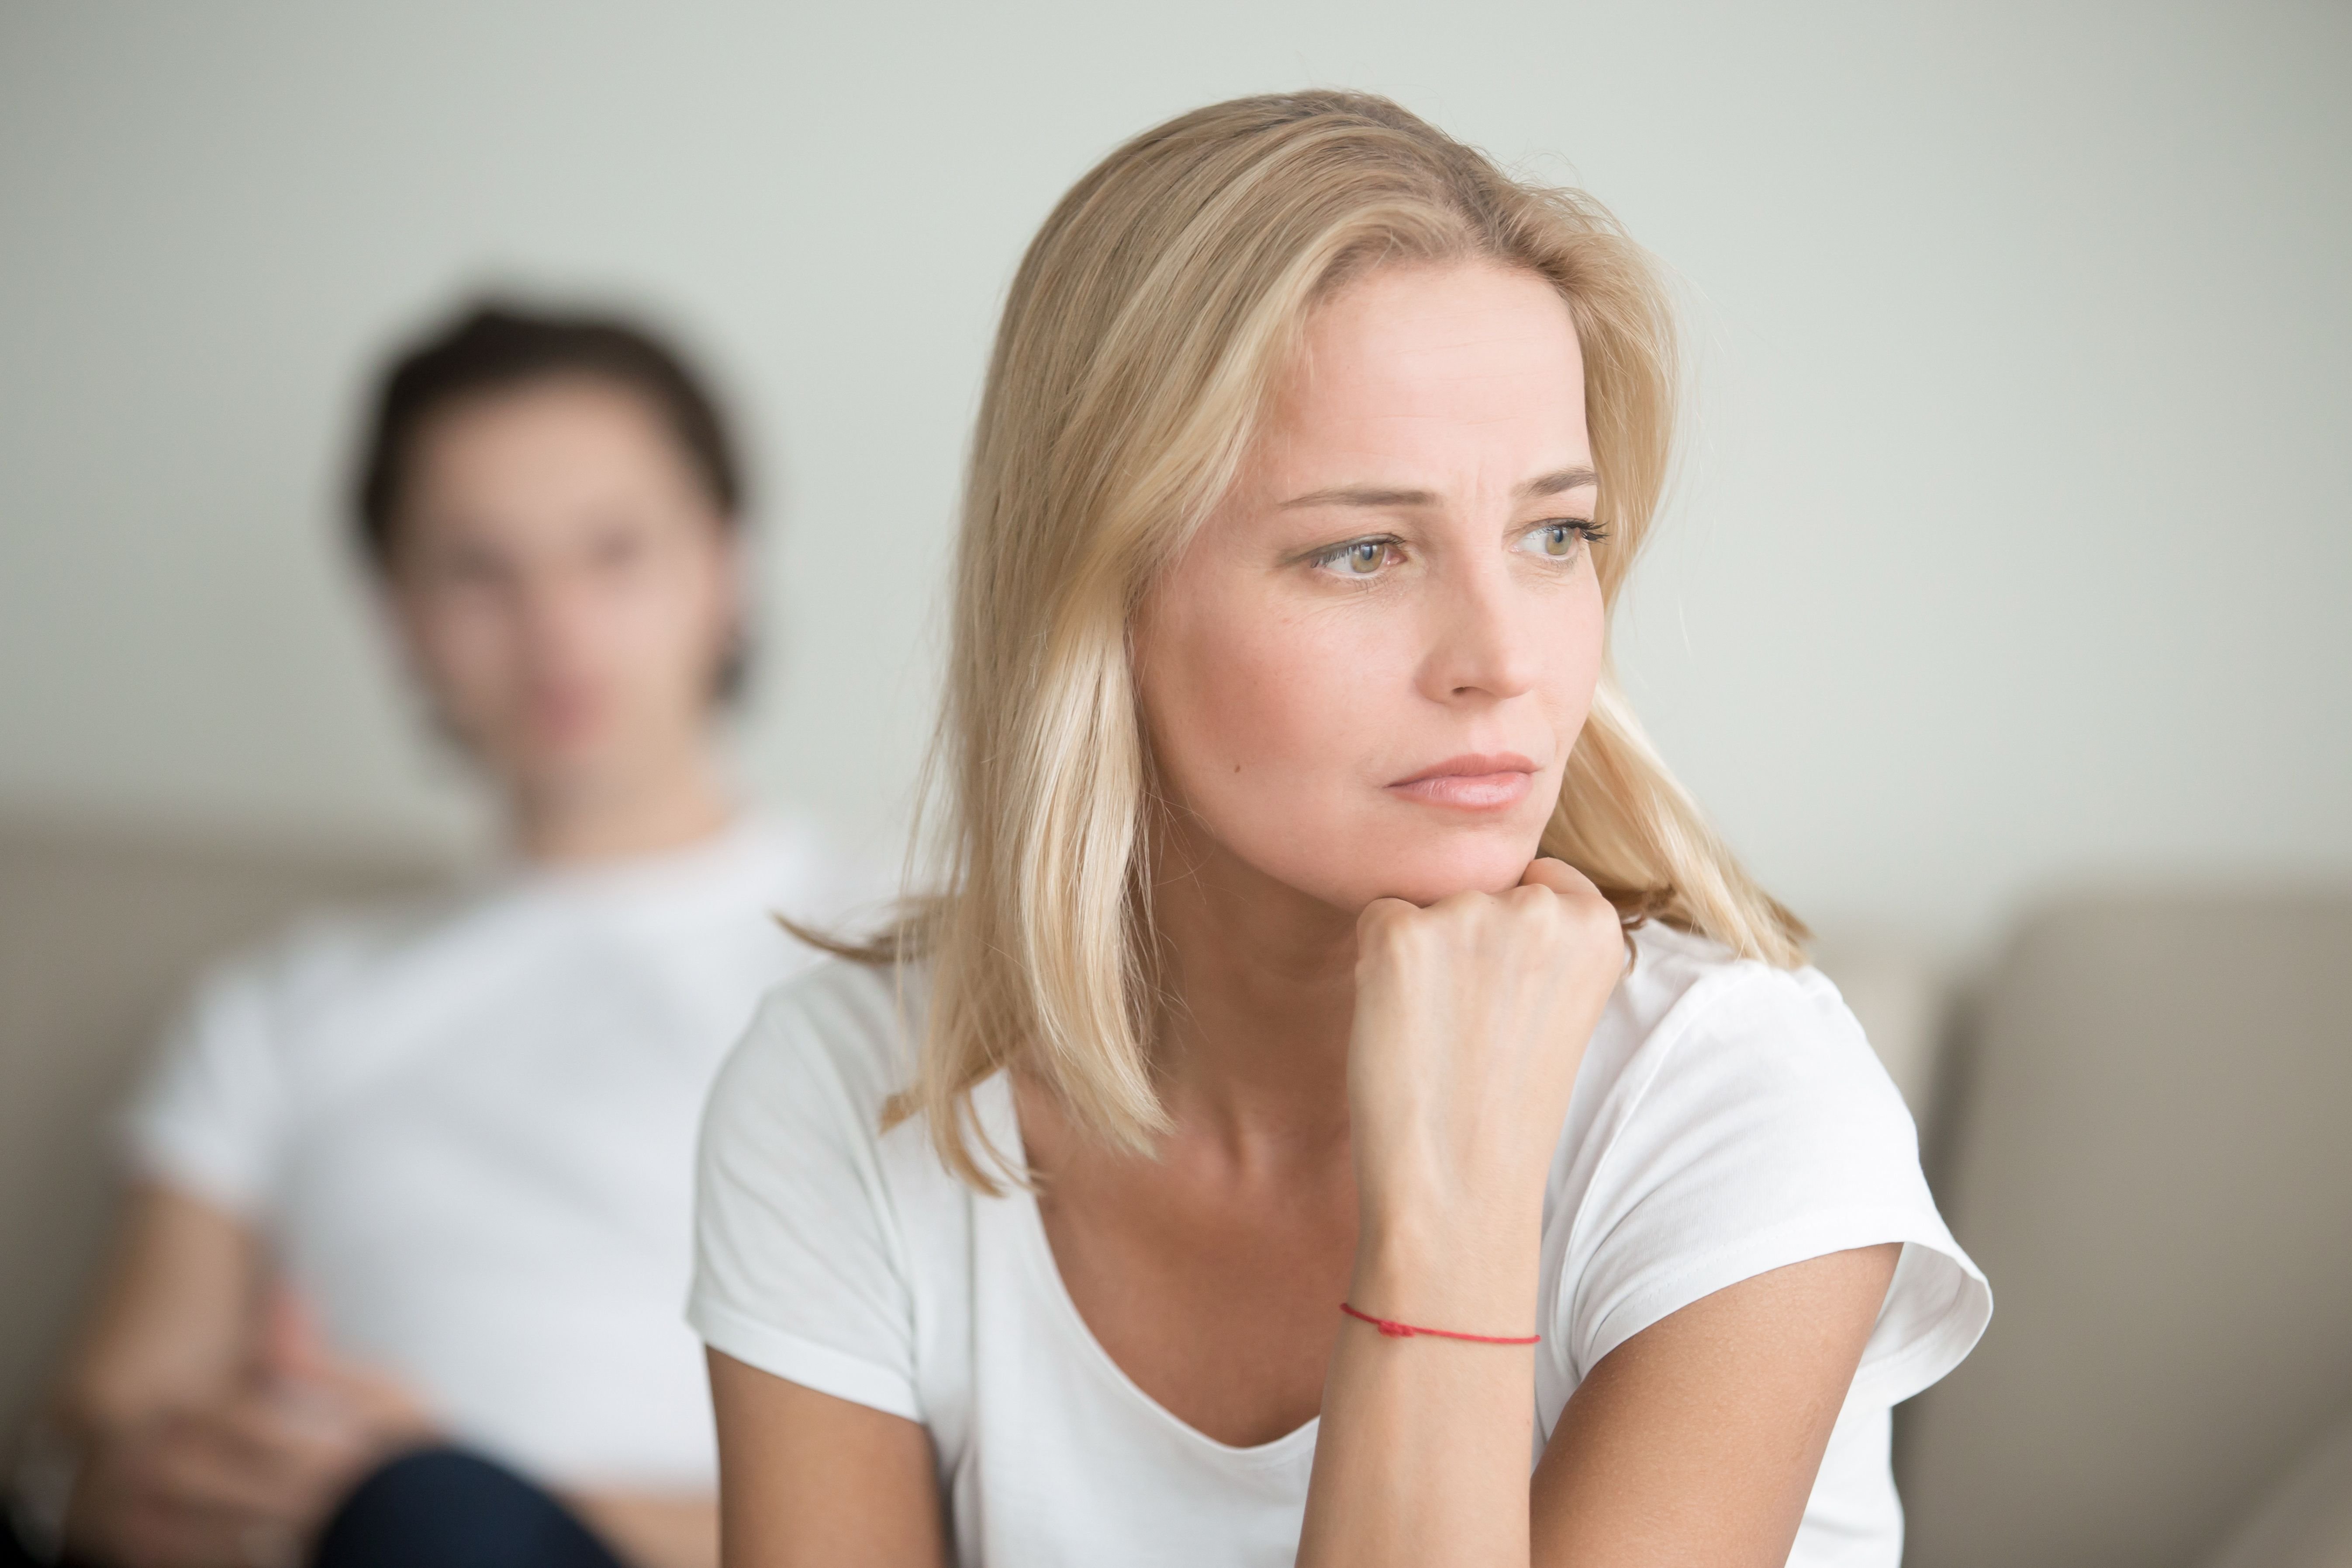 A woman stares blankly as she has deep thoughts. | Source: Shutterstock